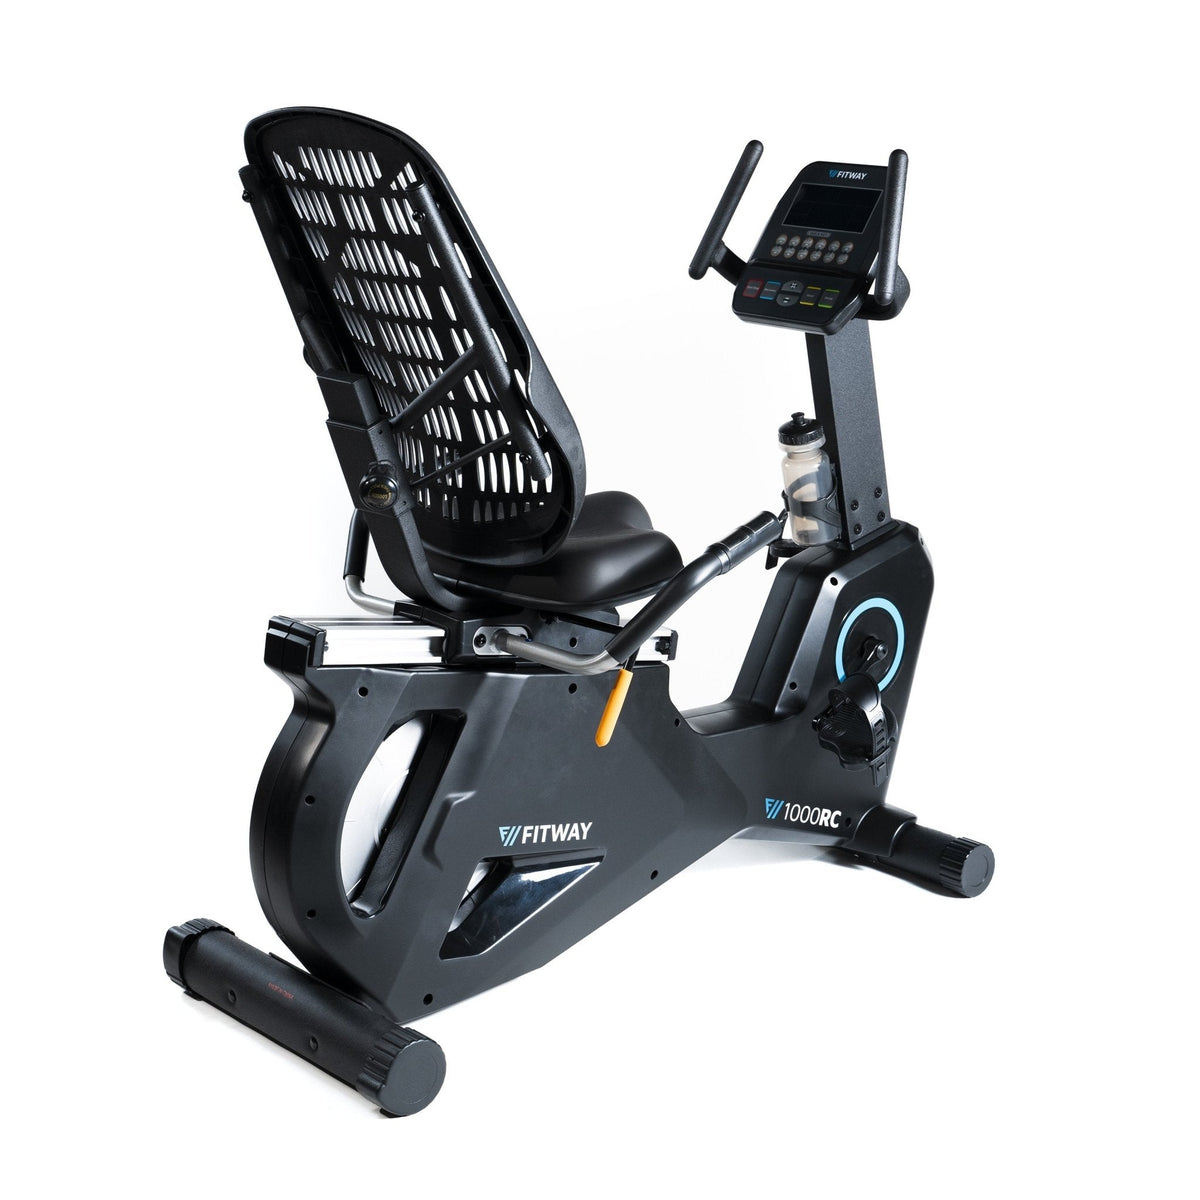 FitWay Equip. 1000RC Recumbent Bike - Fitness Experience